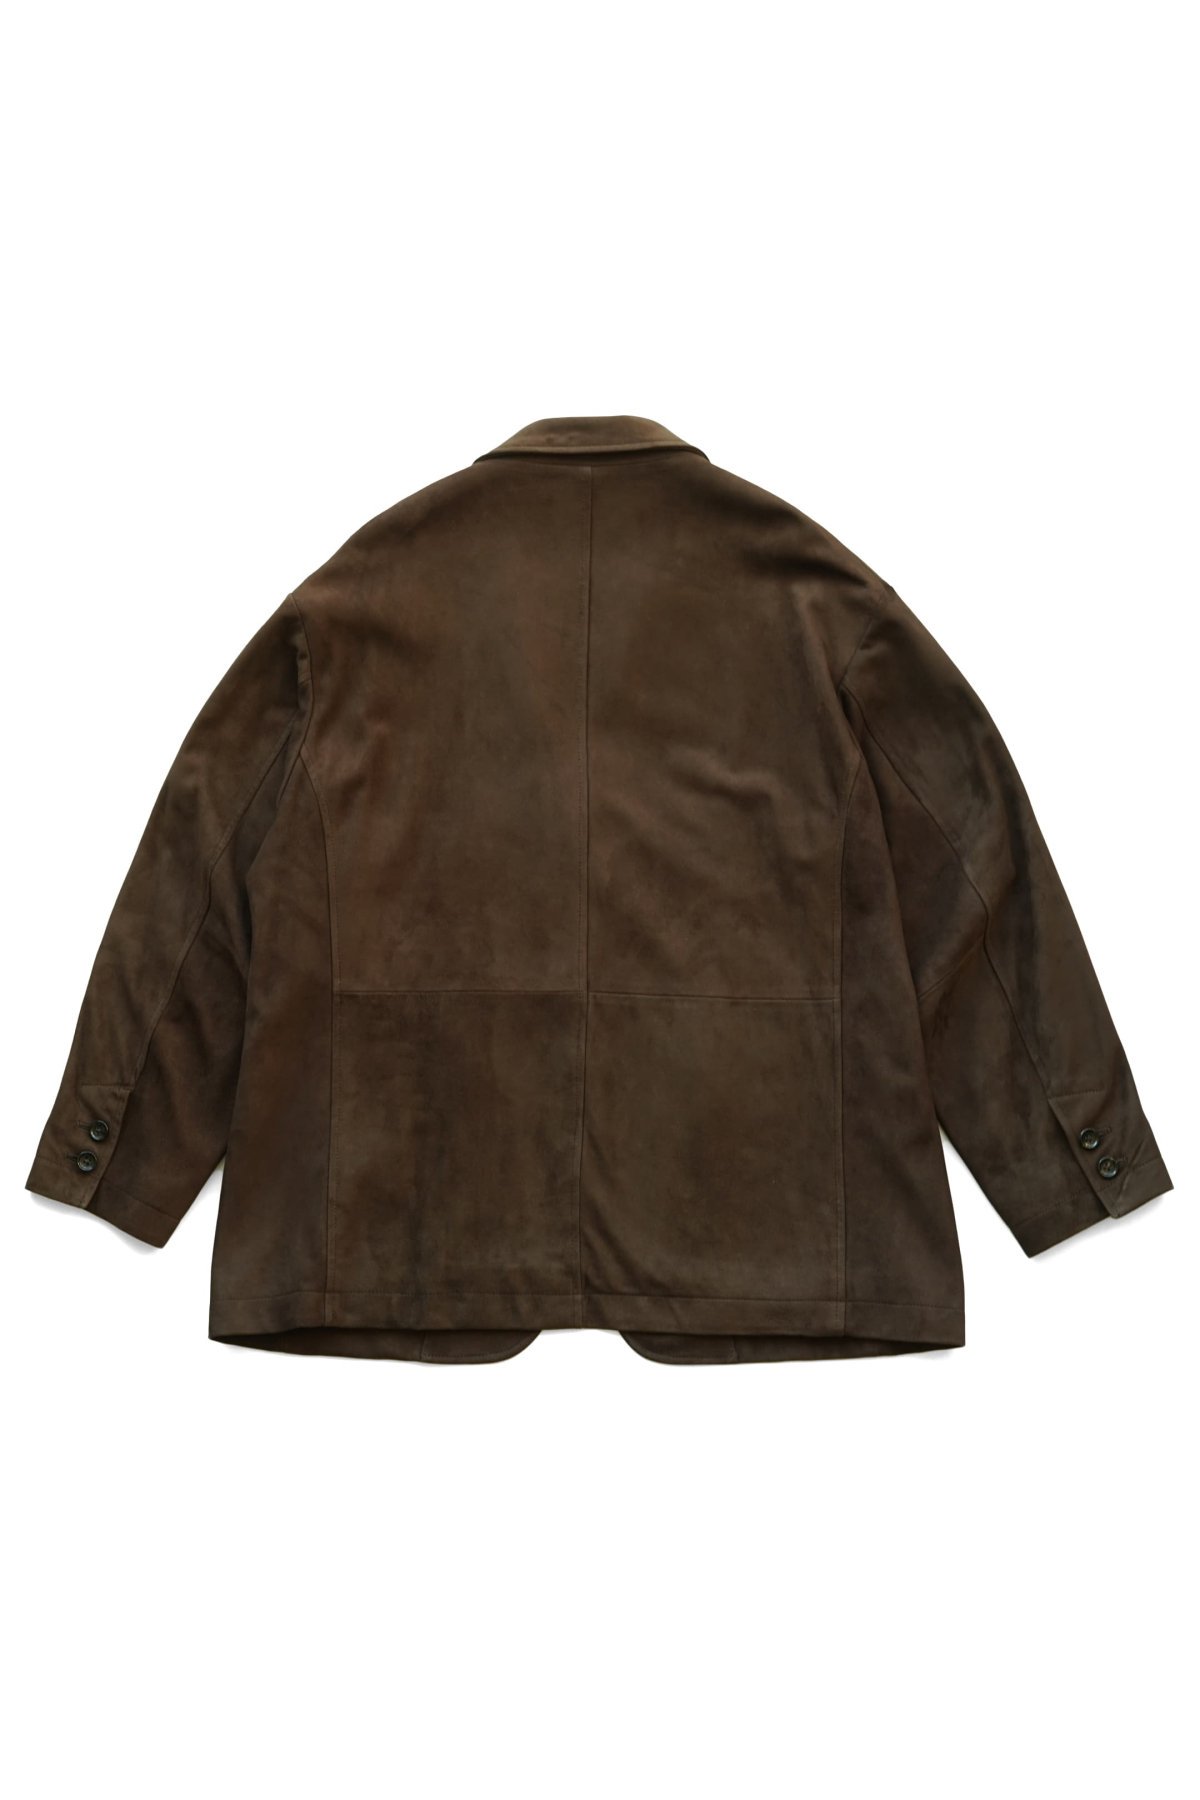 Porter Classic - LEATHER SUEDE JACKET(ENTREFINO) - BROWN ポーター 